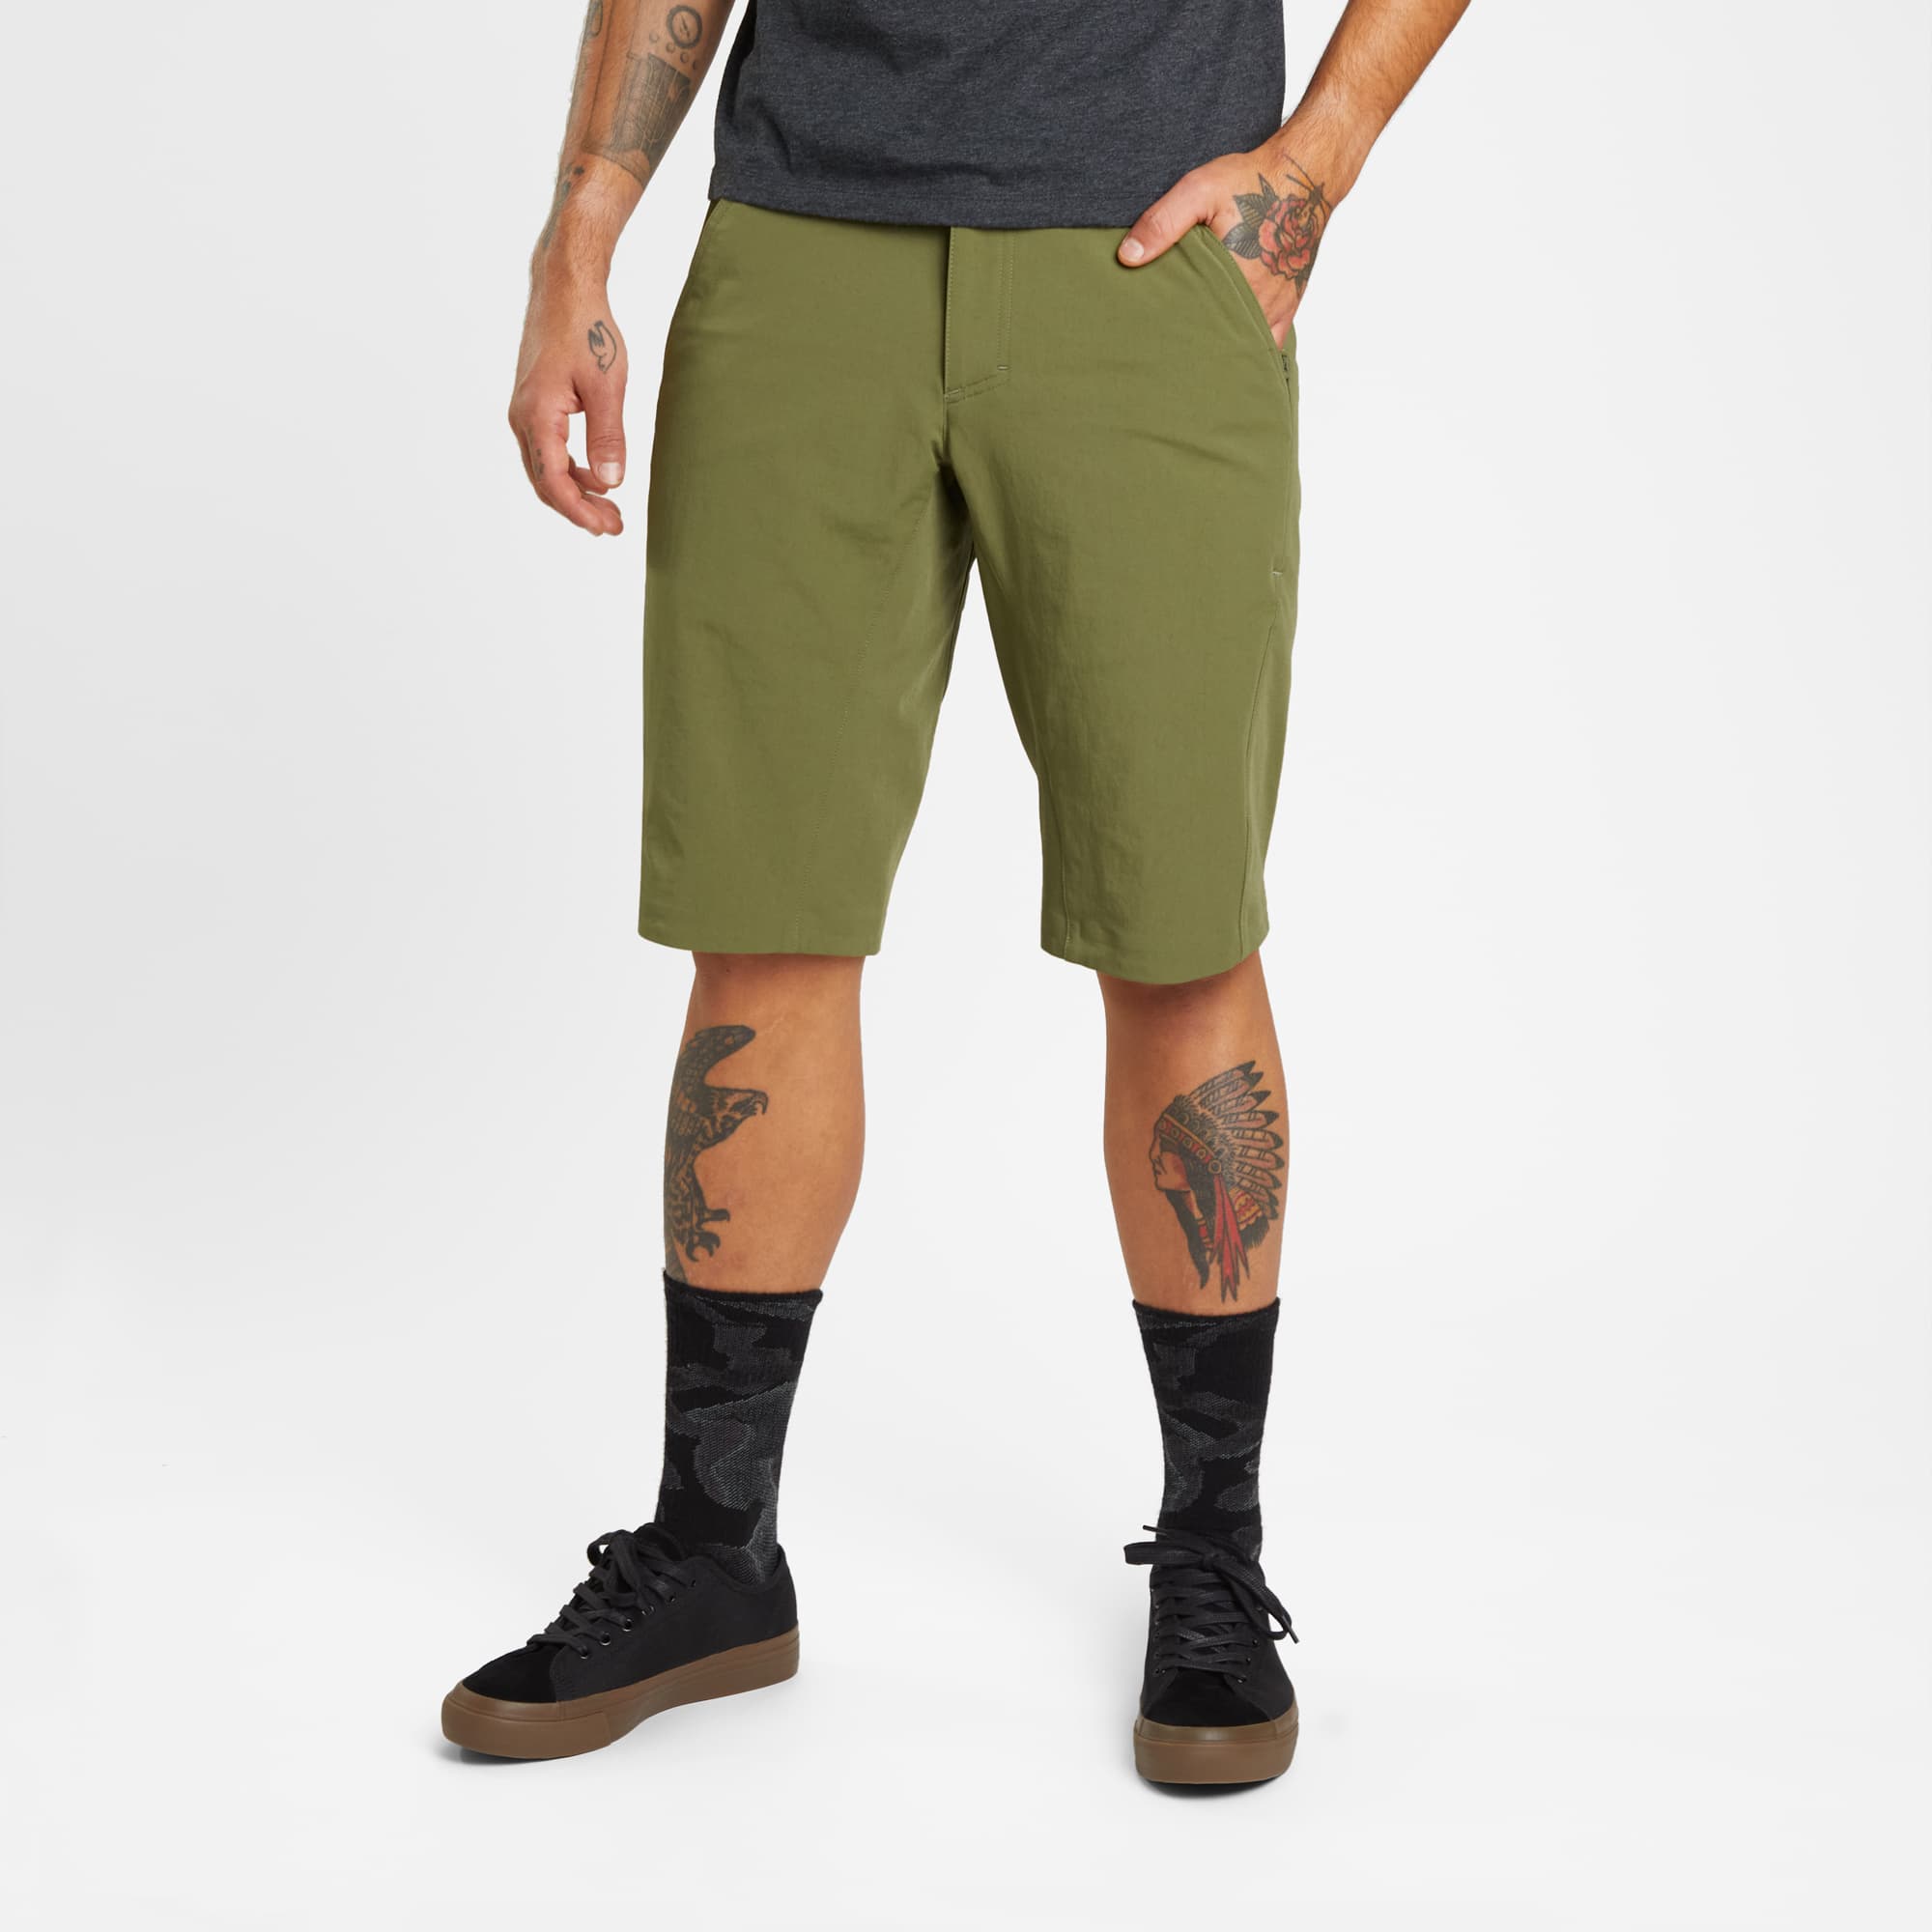 Men's tech Sutro Short in green worn by a man #color_olive branch